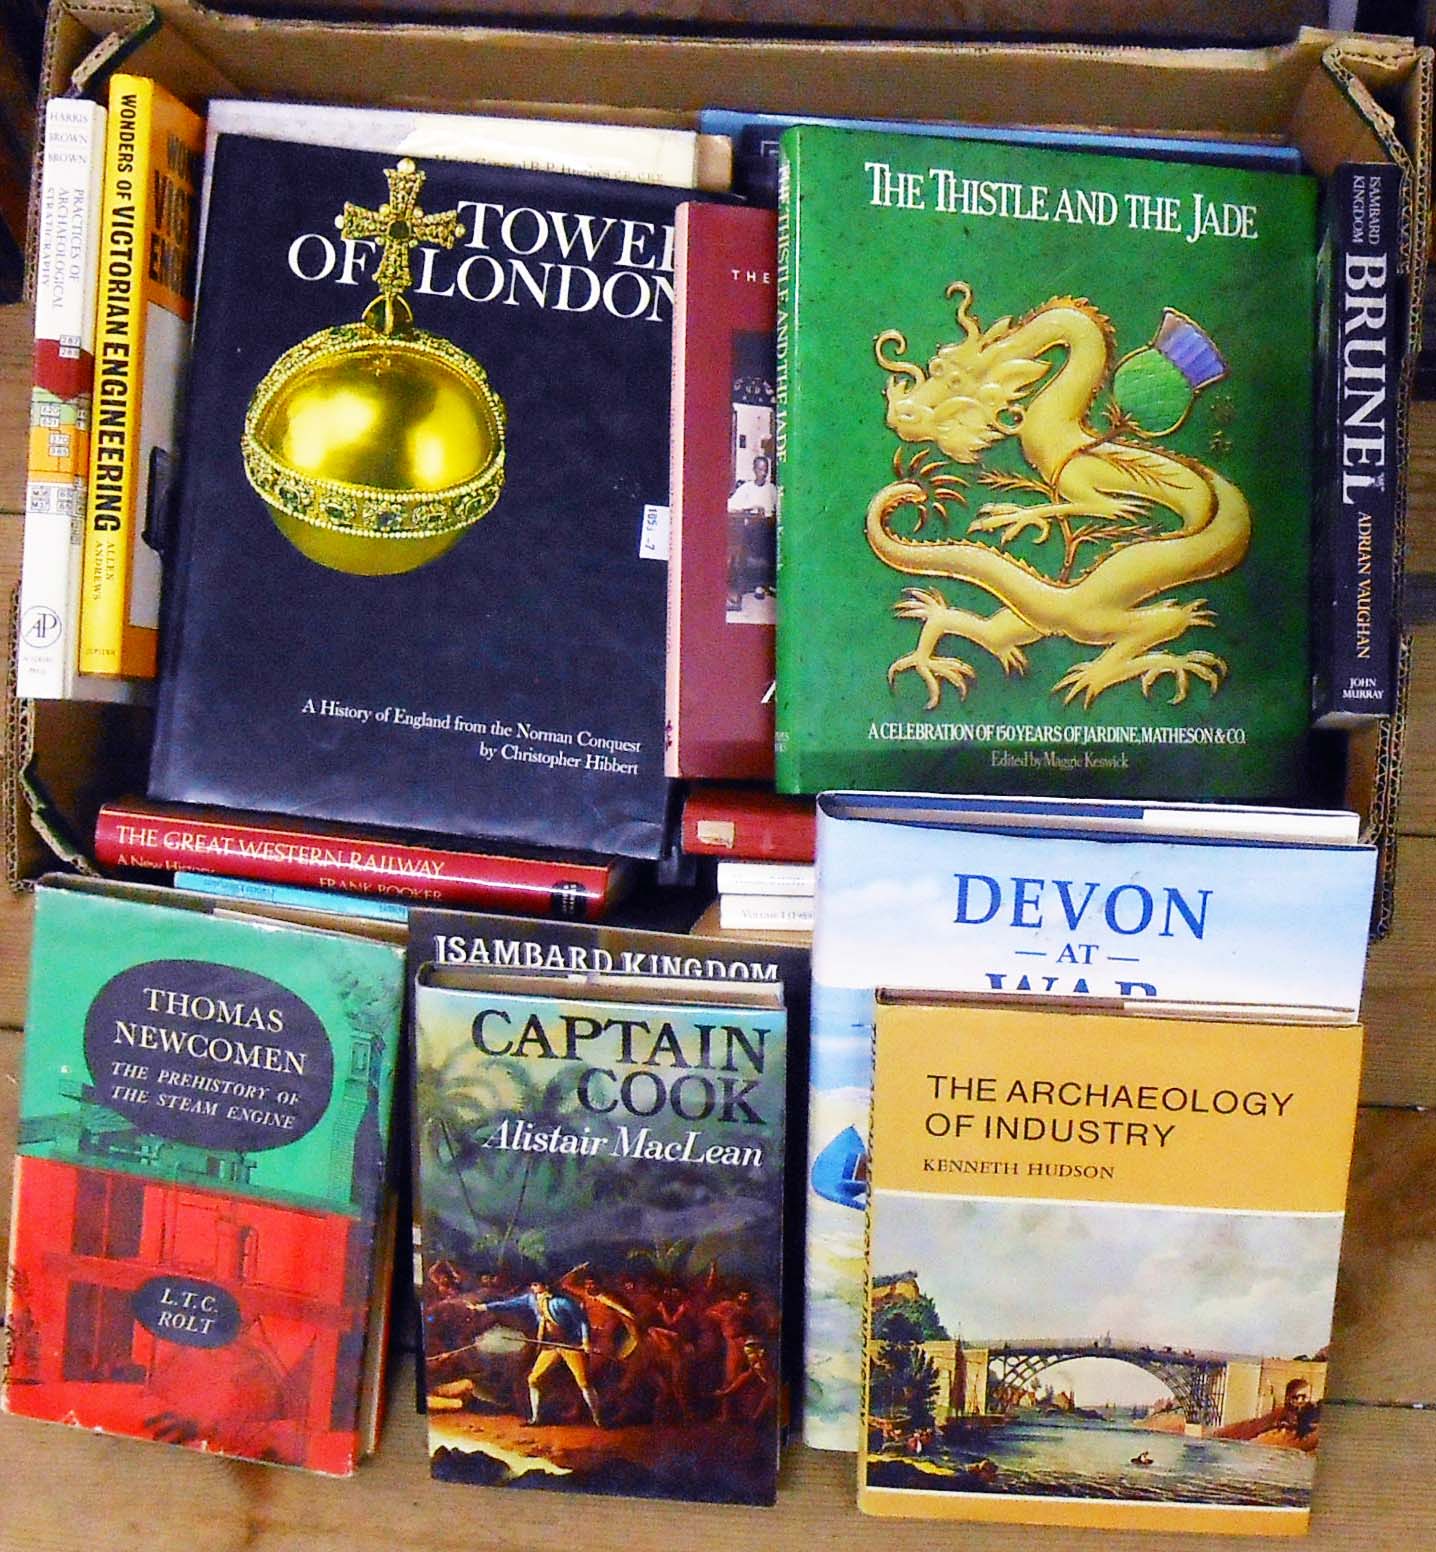 A quantity of hard back and books including numerous engineering titles, also archaeology, etc.